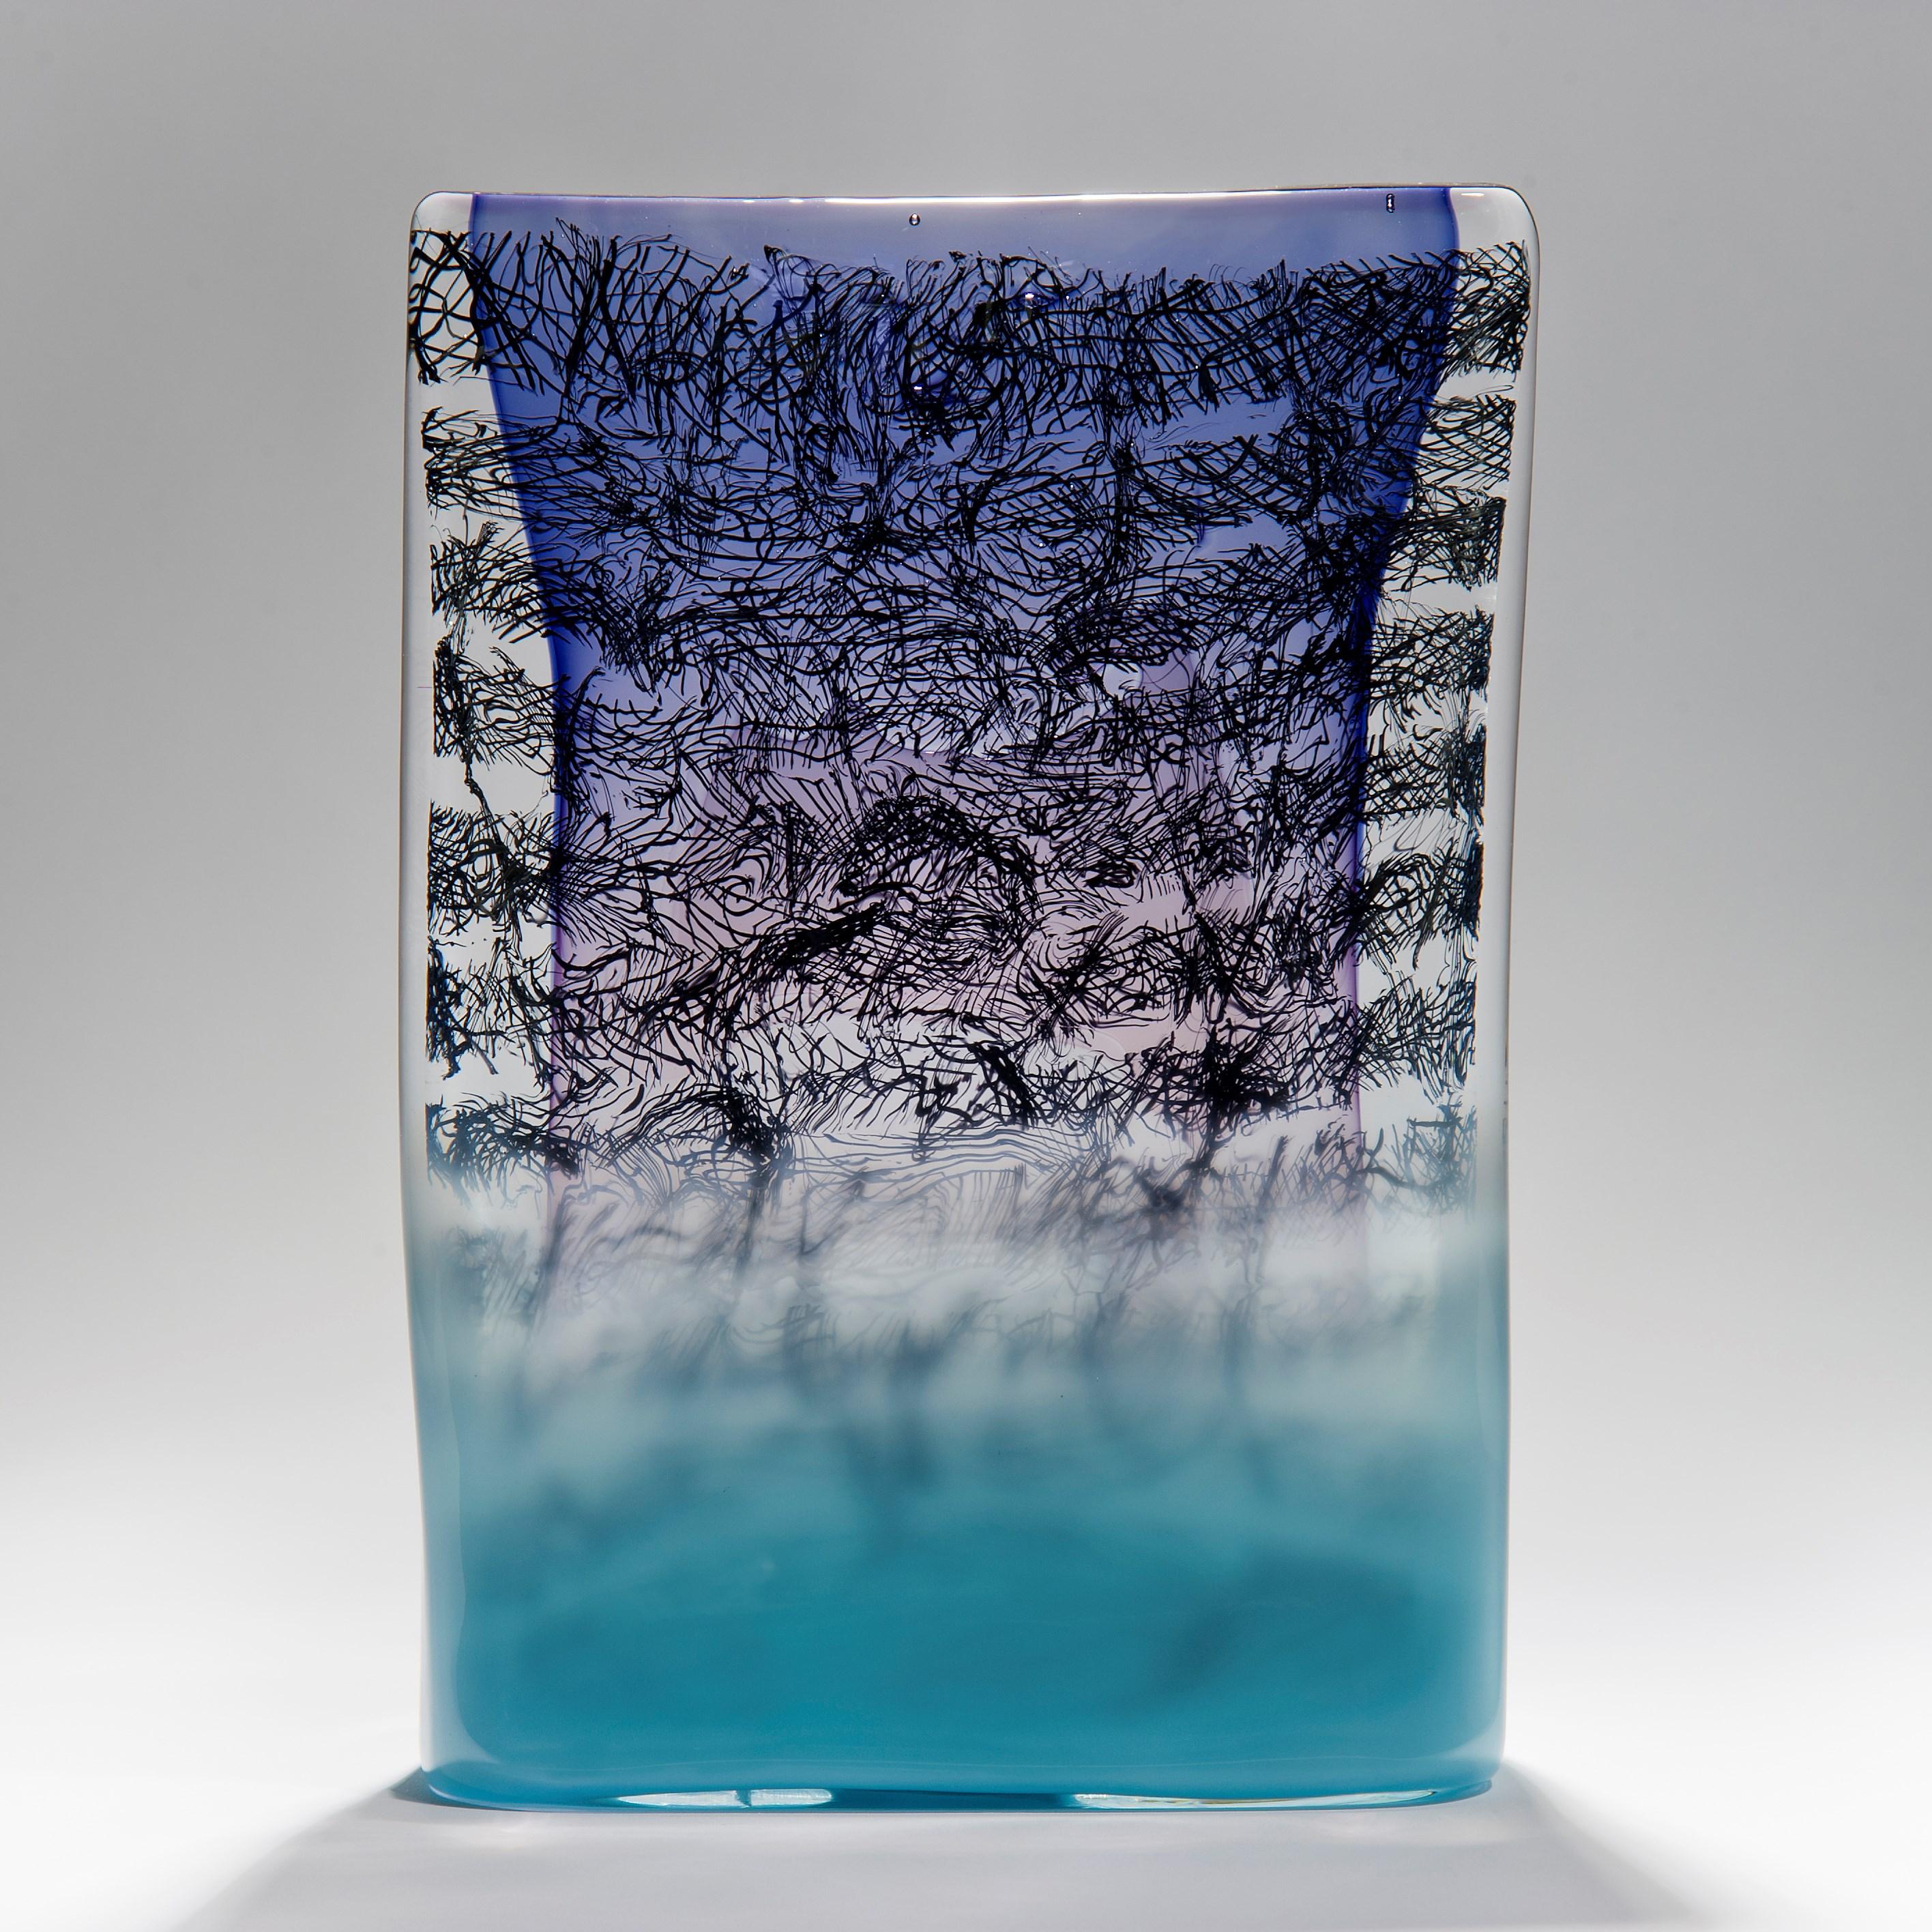 Cryptograph 4102721 (in Pale Turquoise & Hyacinth) is a unique solid glass sculpture created by the British artist, Louis Thompson. Employing a variety of glass techniques, the encased lines of 'script' are first created by carving a pre-made glass